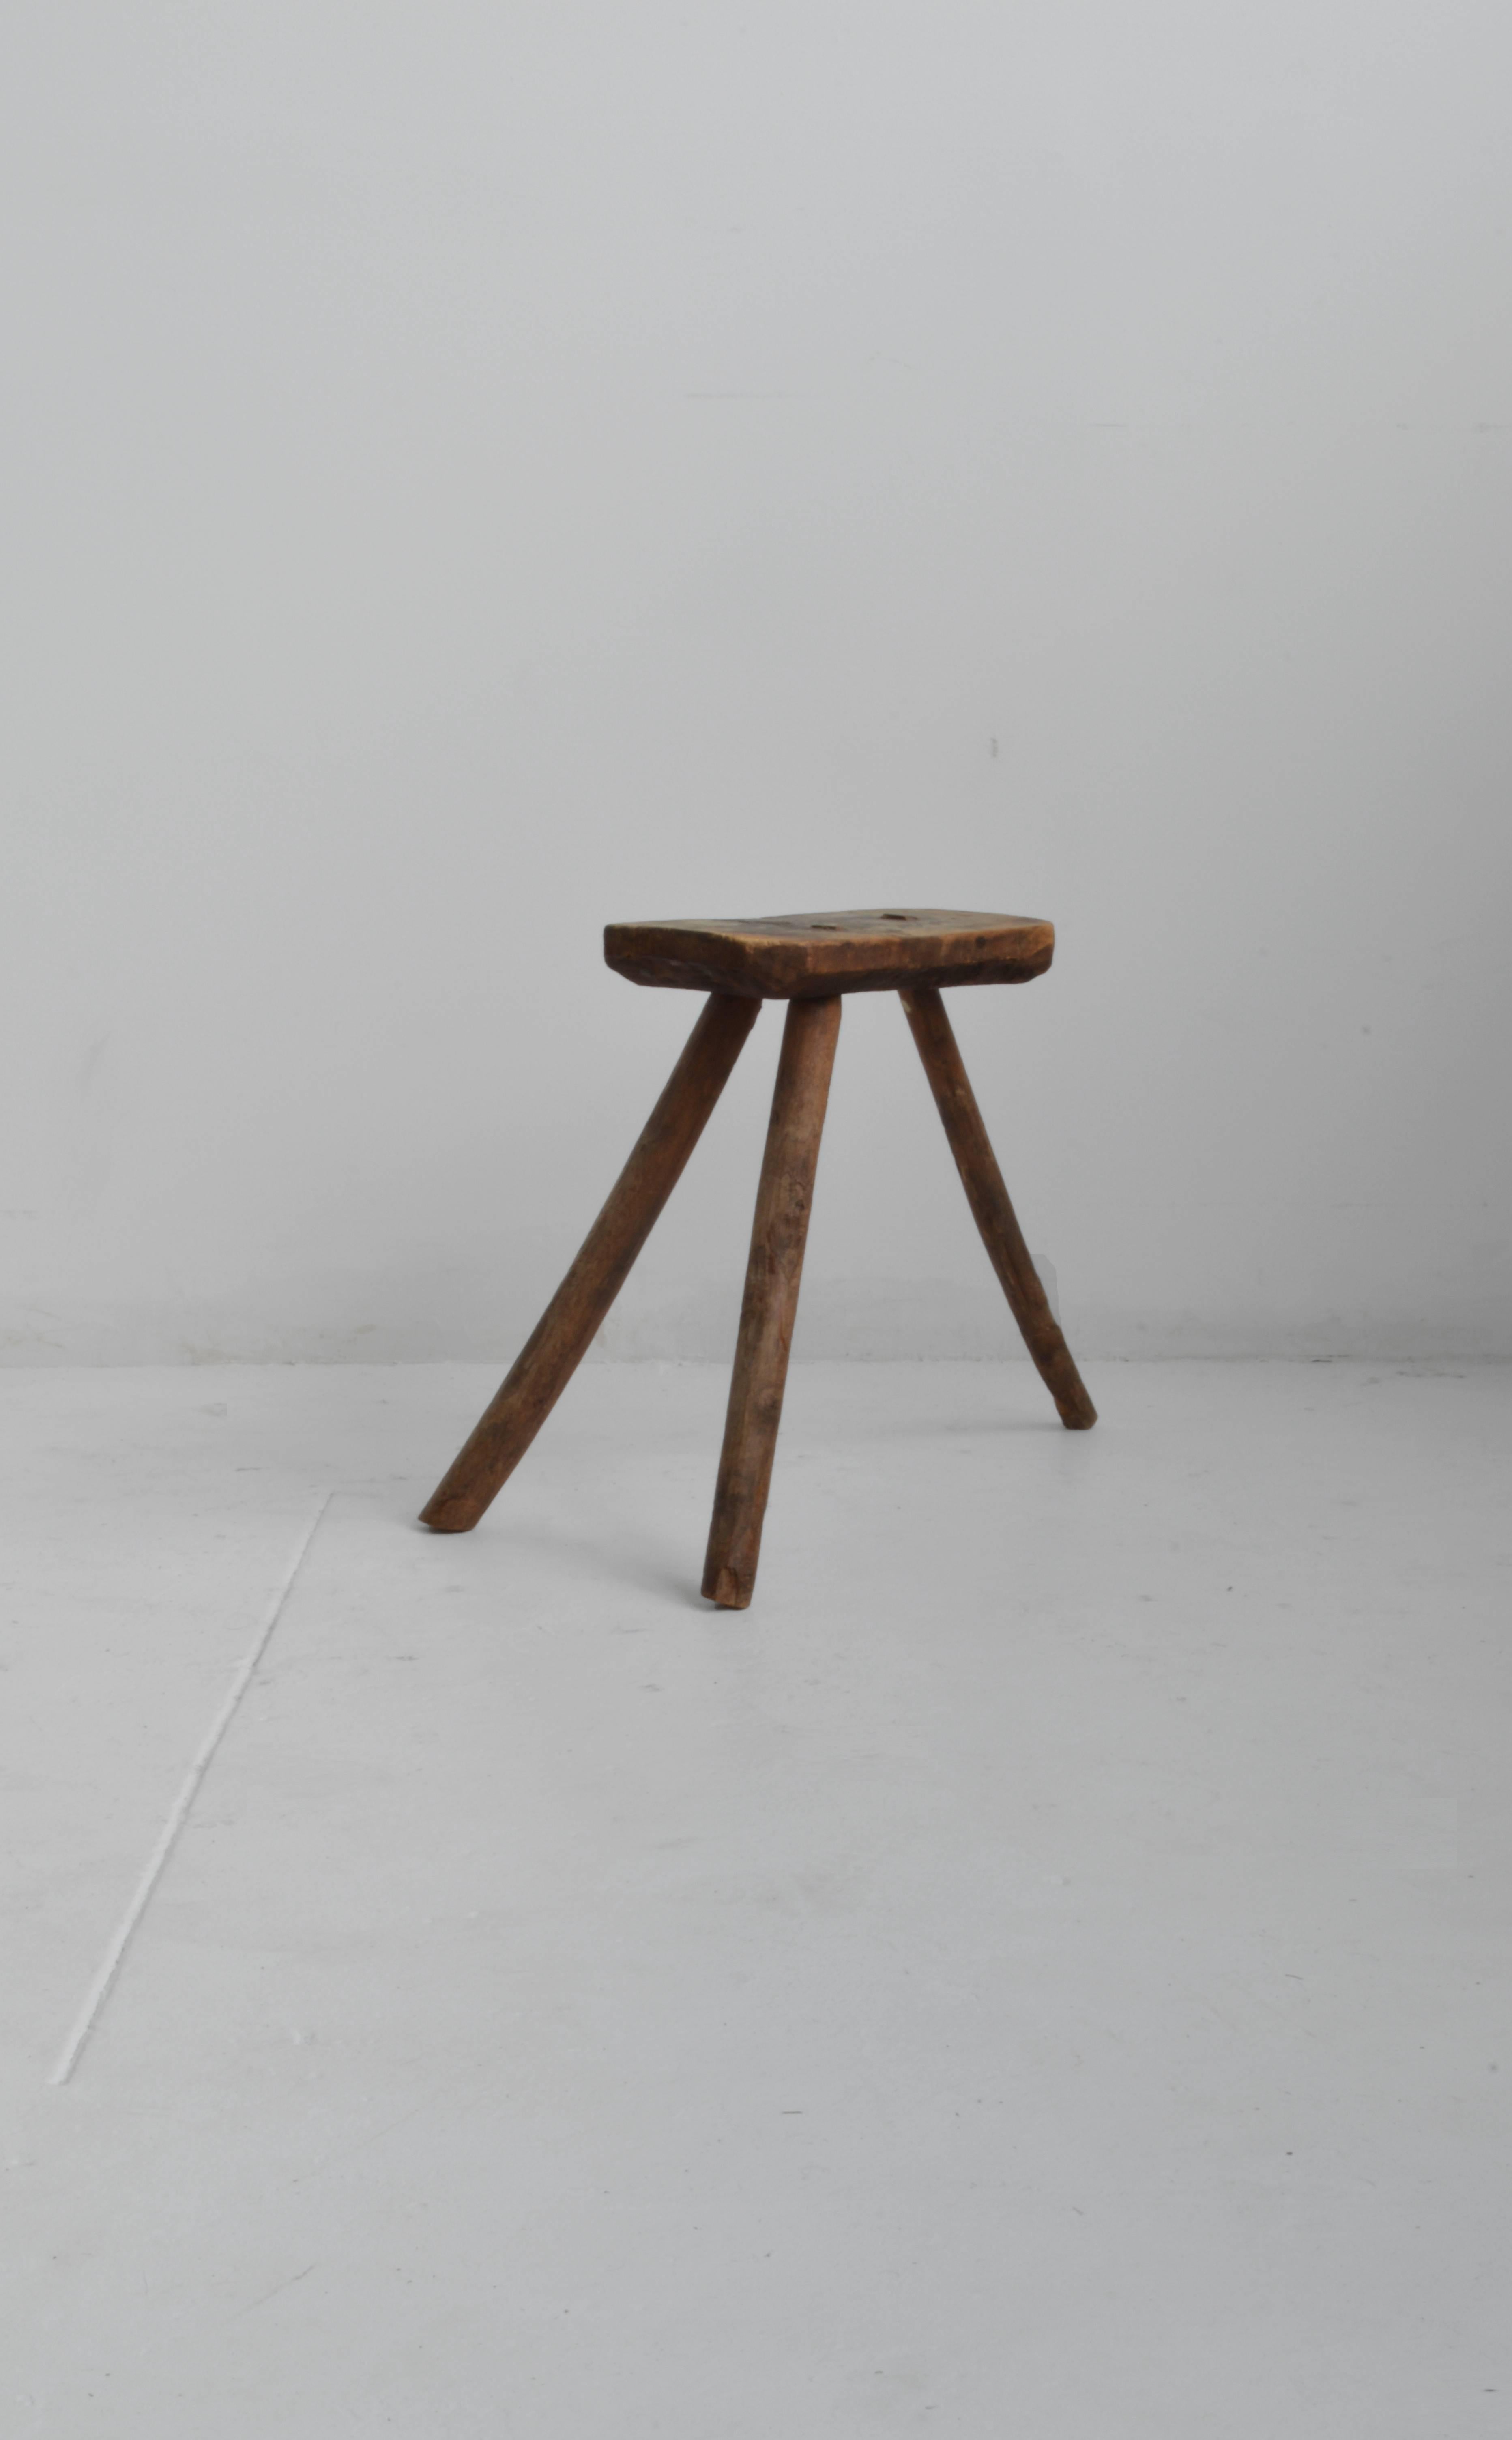 Charming late 18th century wooden milking stool. This solid wood stool has three splayed legs with a lovely patina and visible wear. Could be used as a decorative object or side table.

 